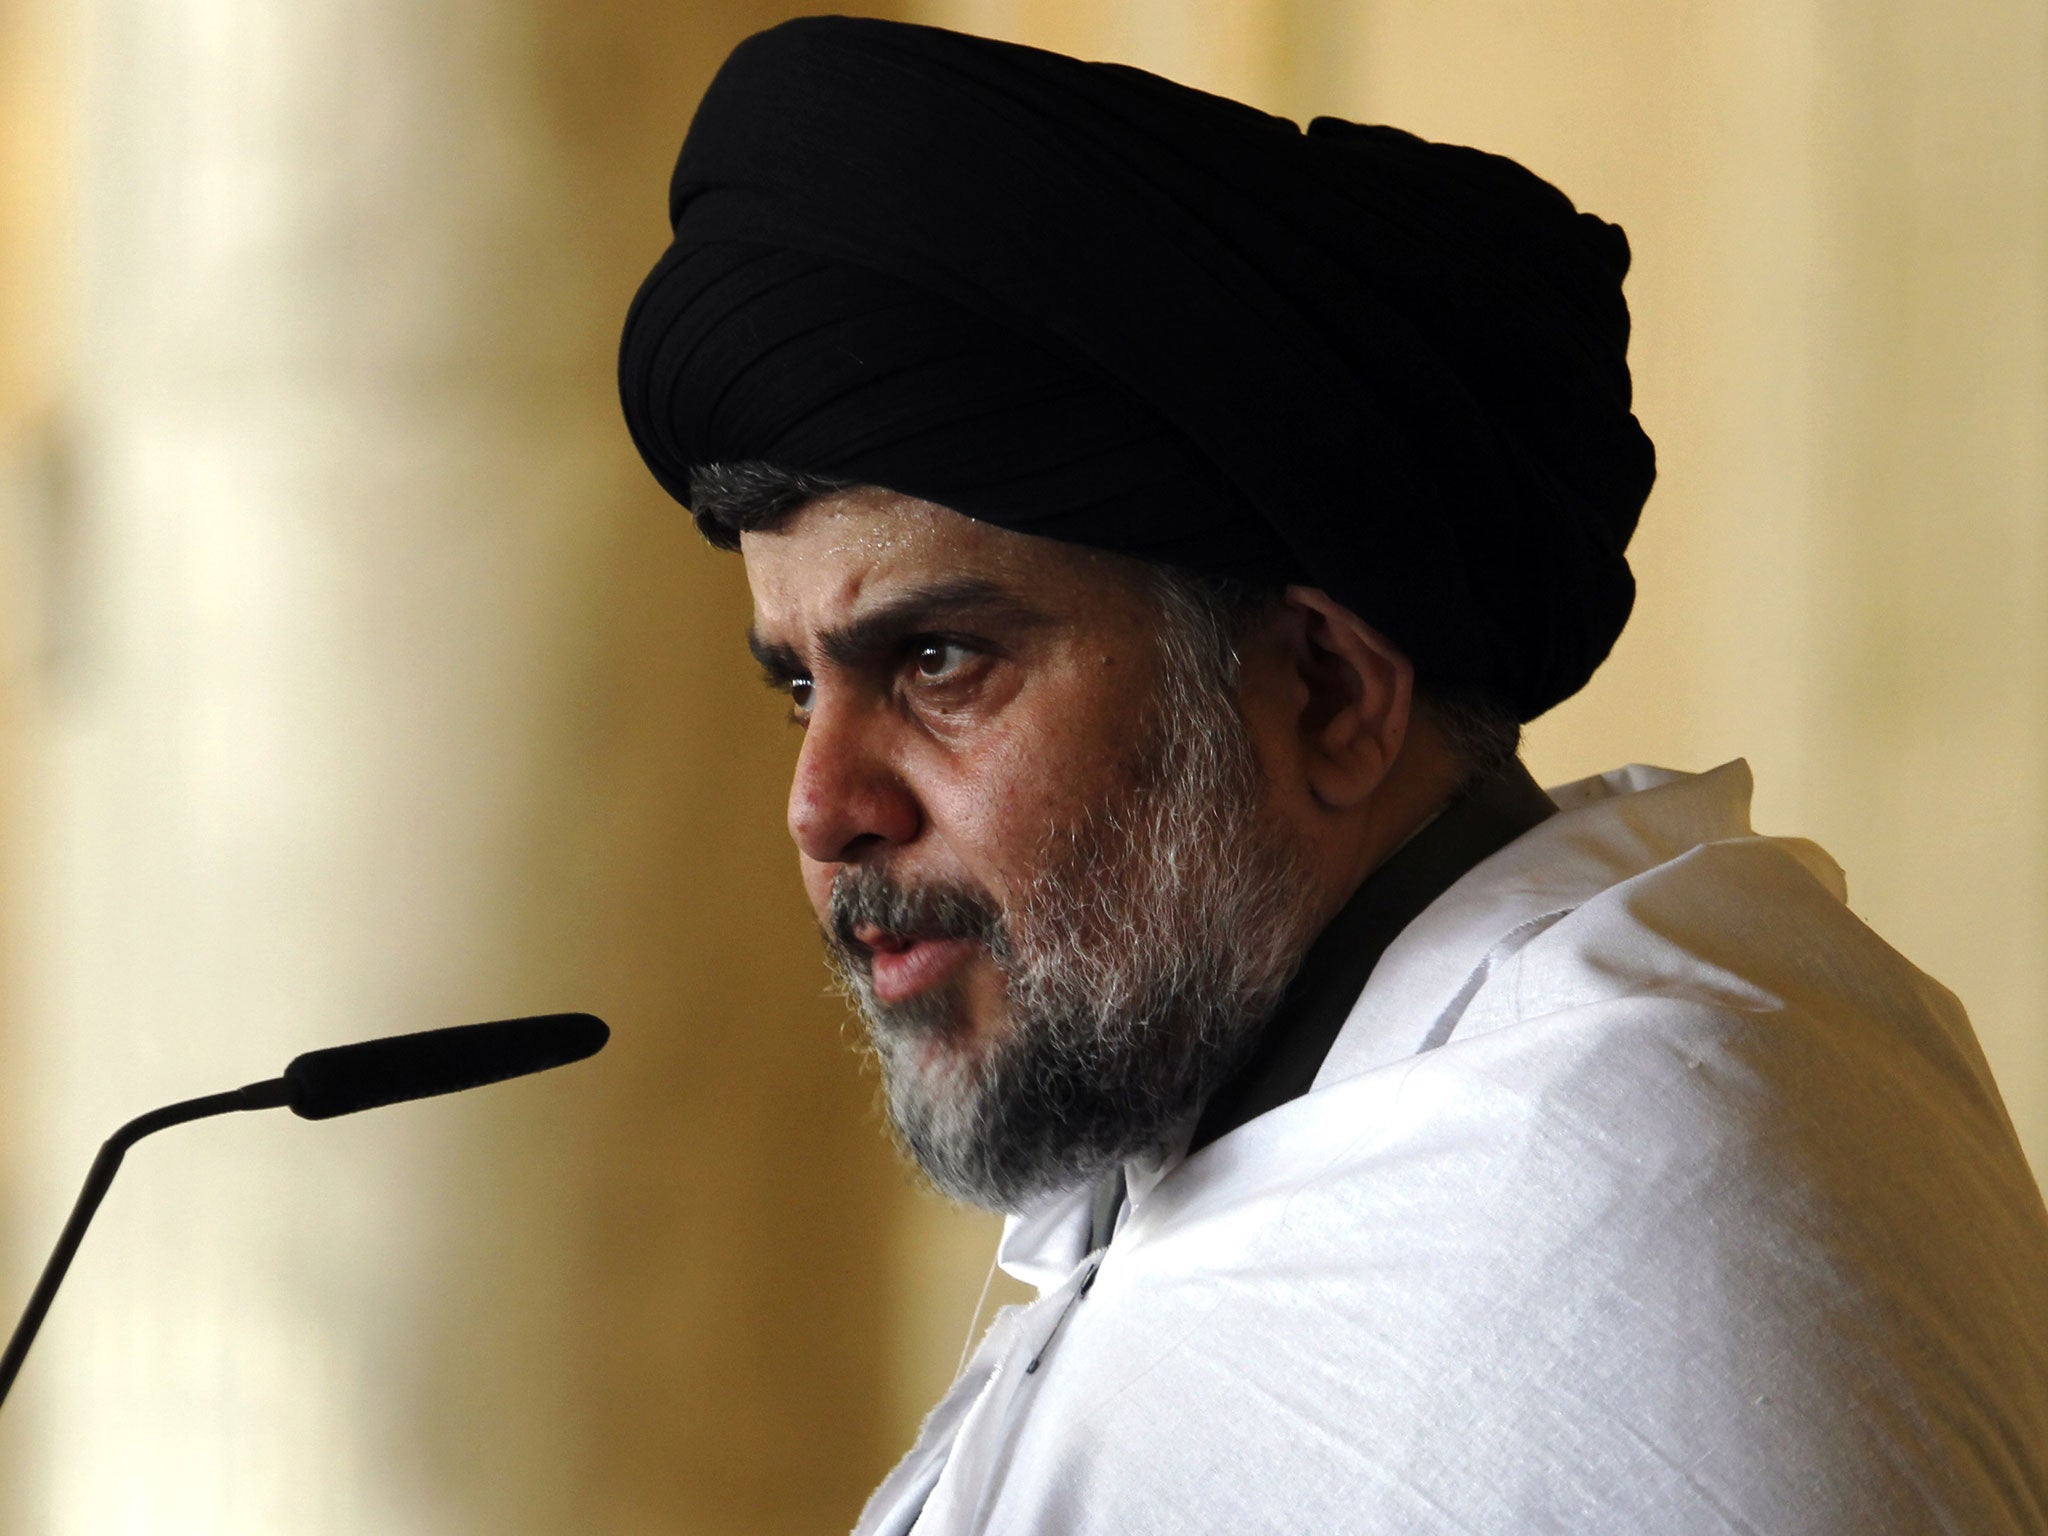 The Shia cleric and warlord is calling for all militias to be disbanded in Iraq